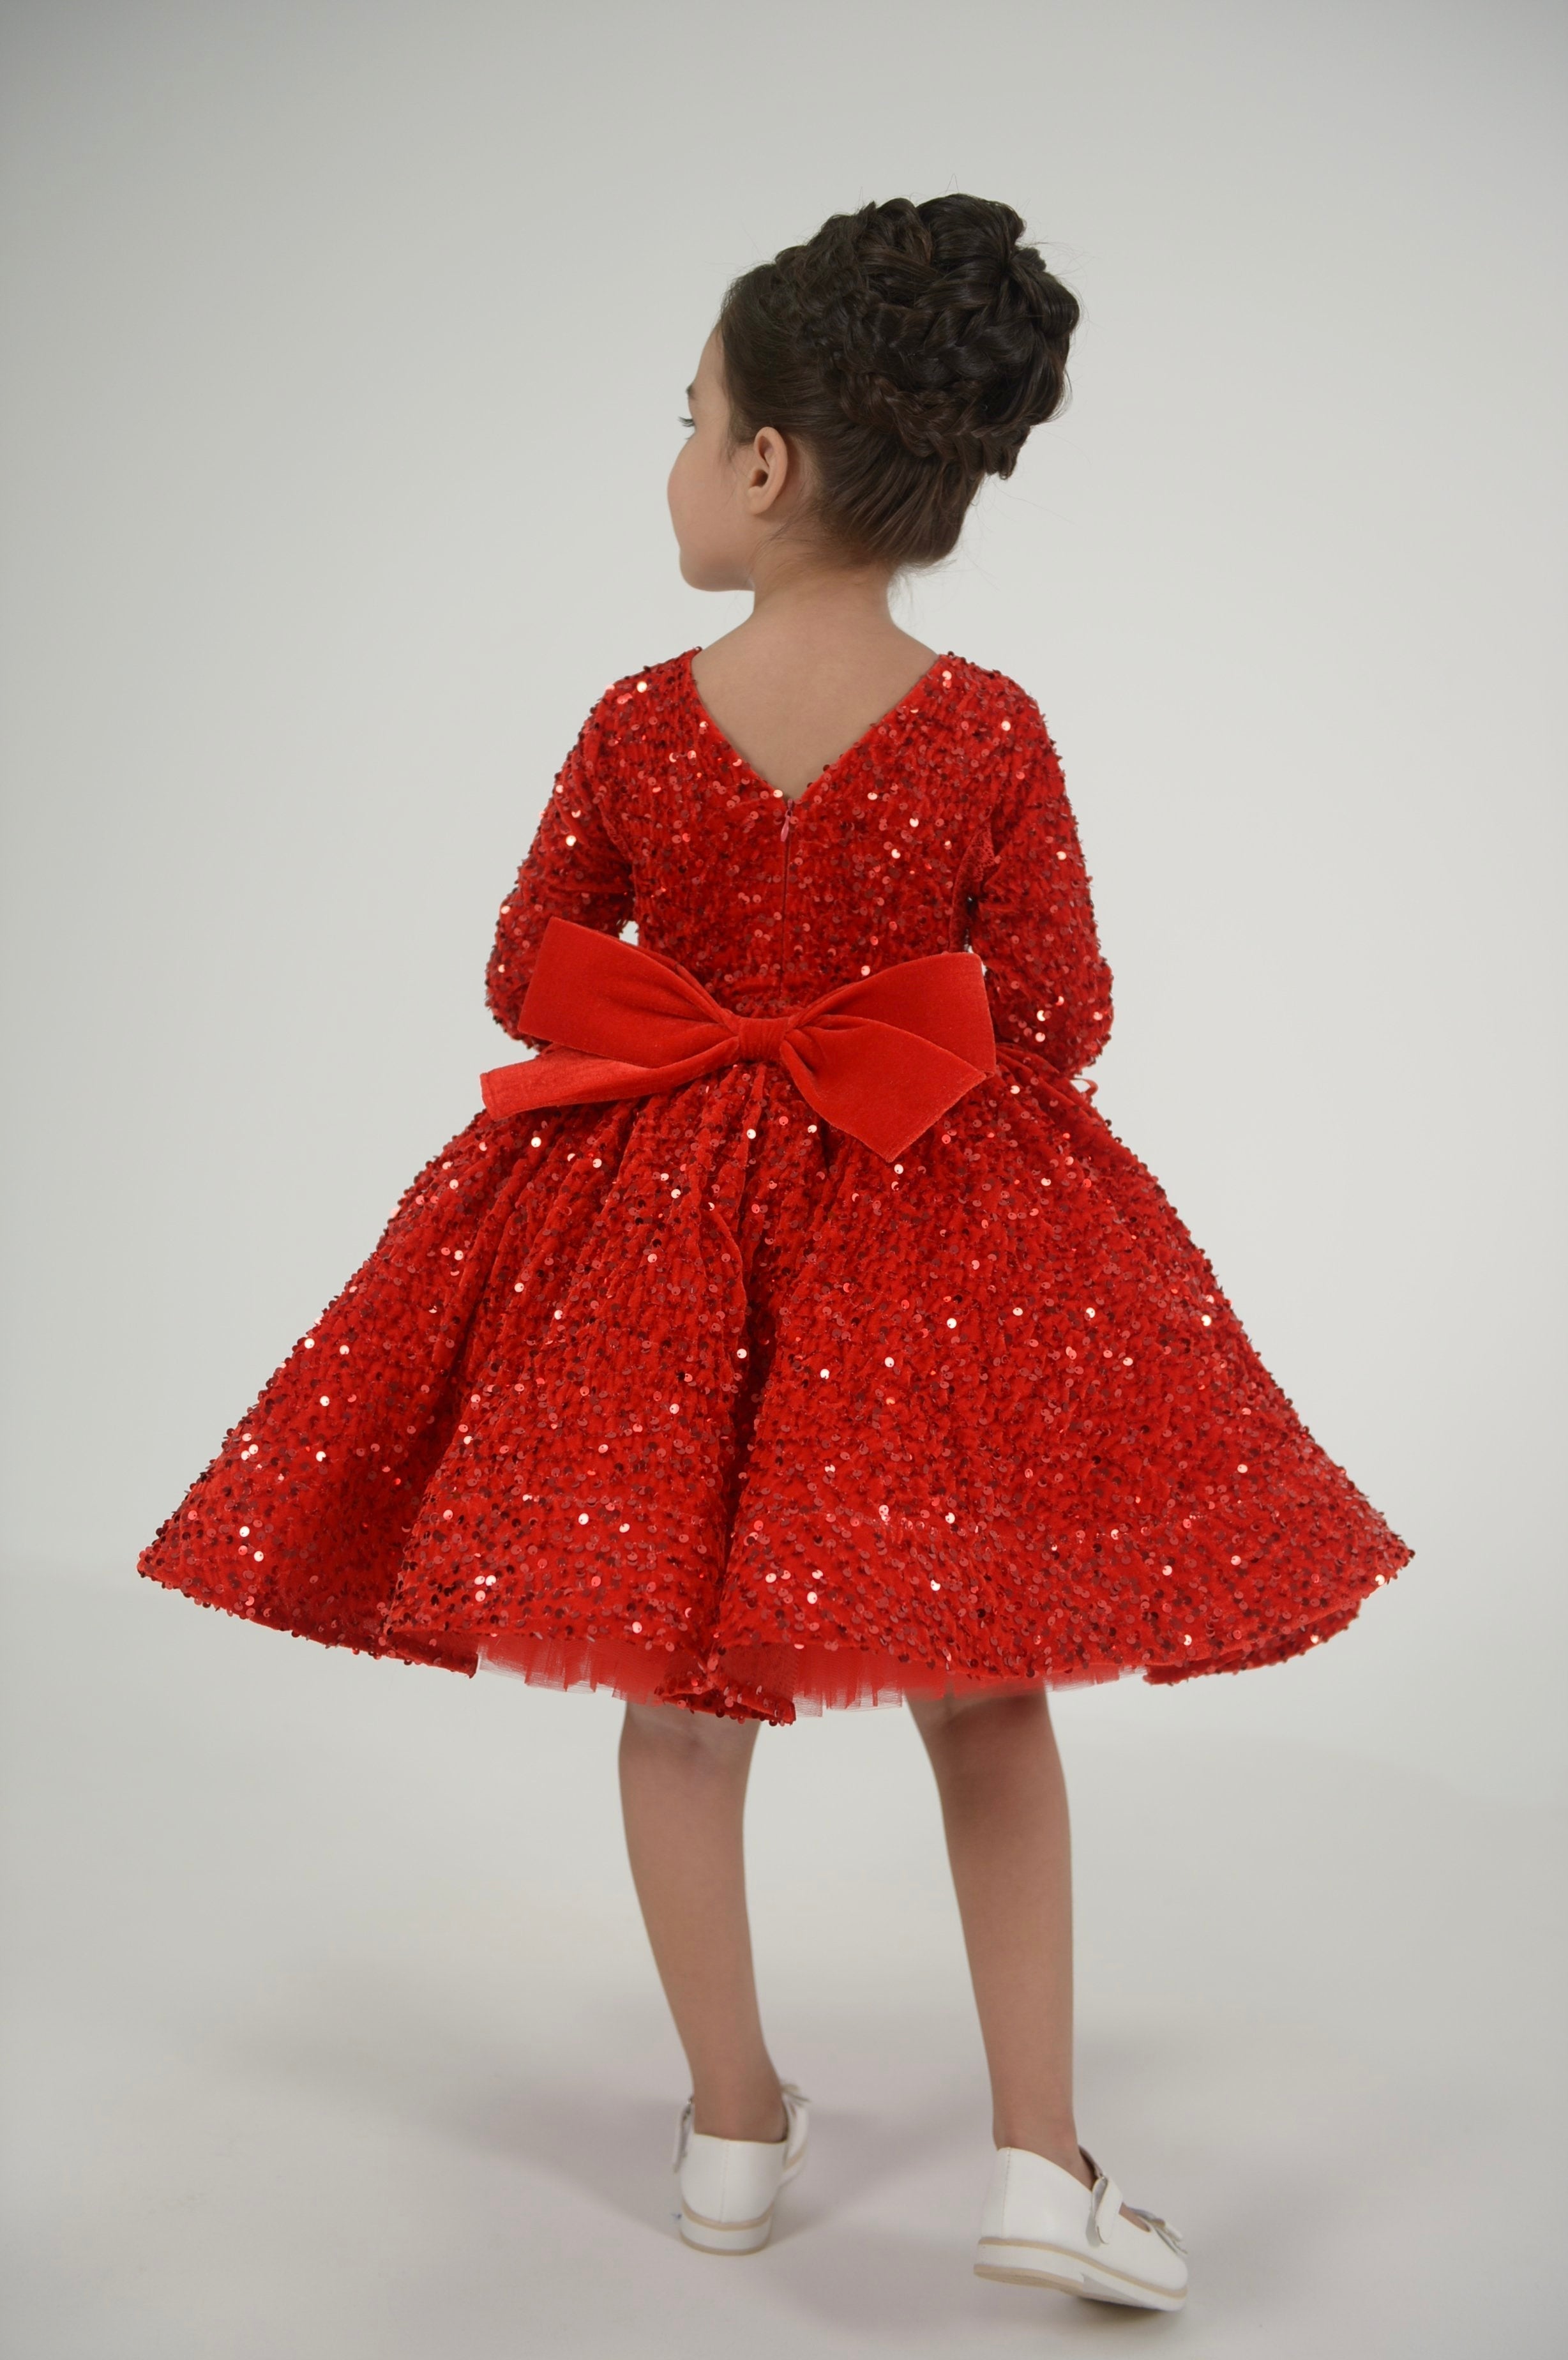 Birthday Dress For Girl (Size 3-4/Pink/In Stock)